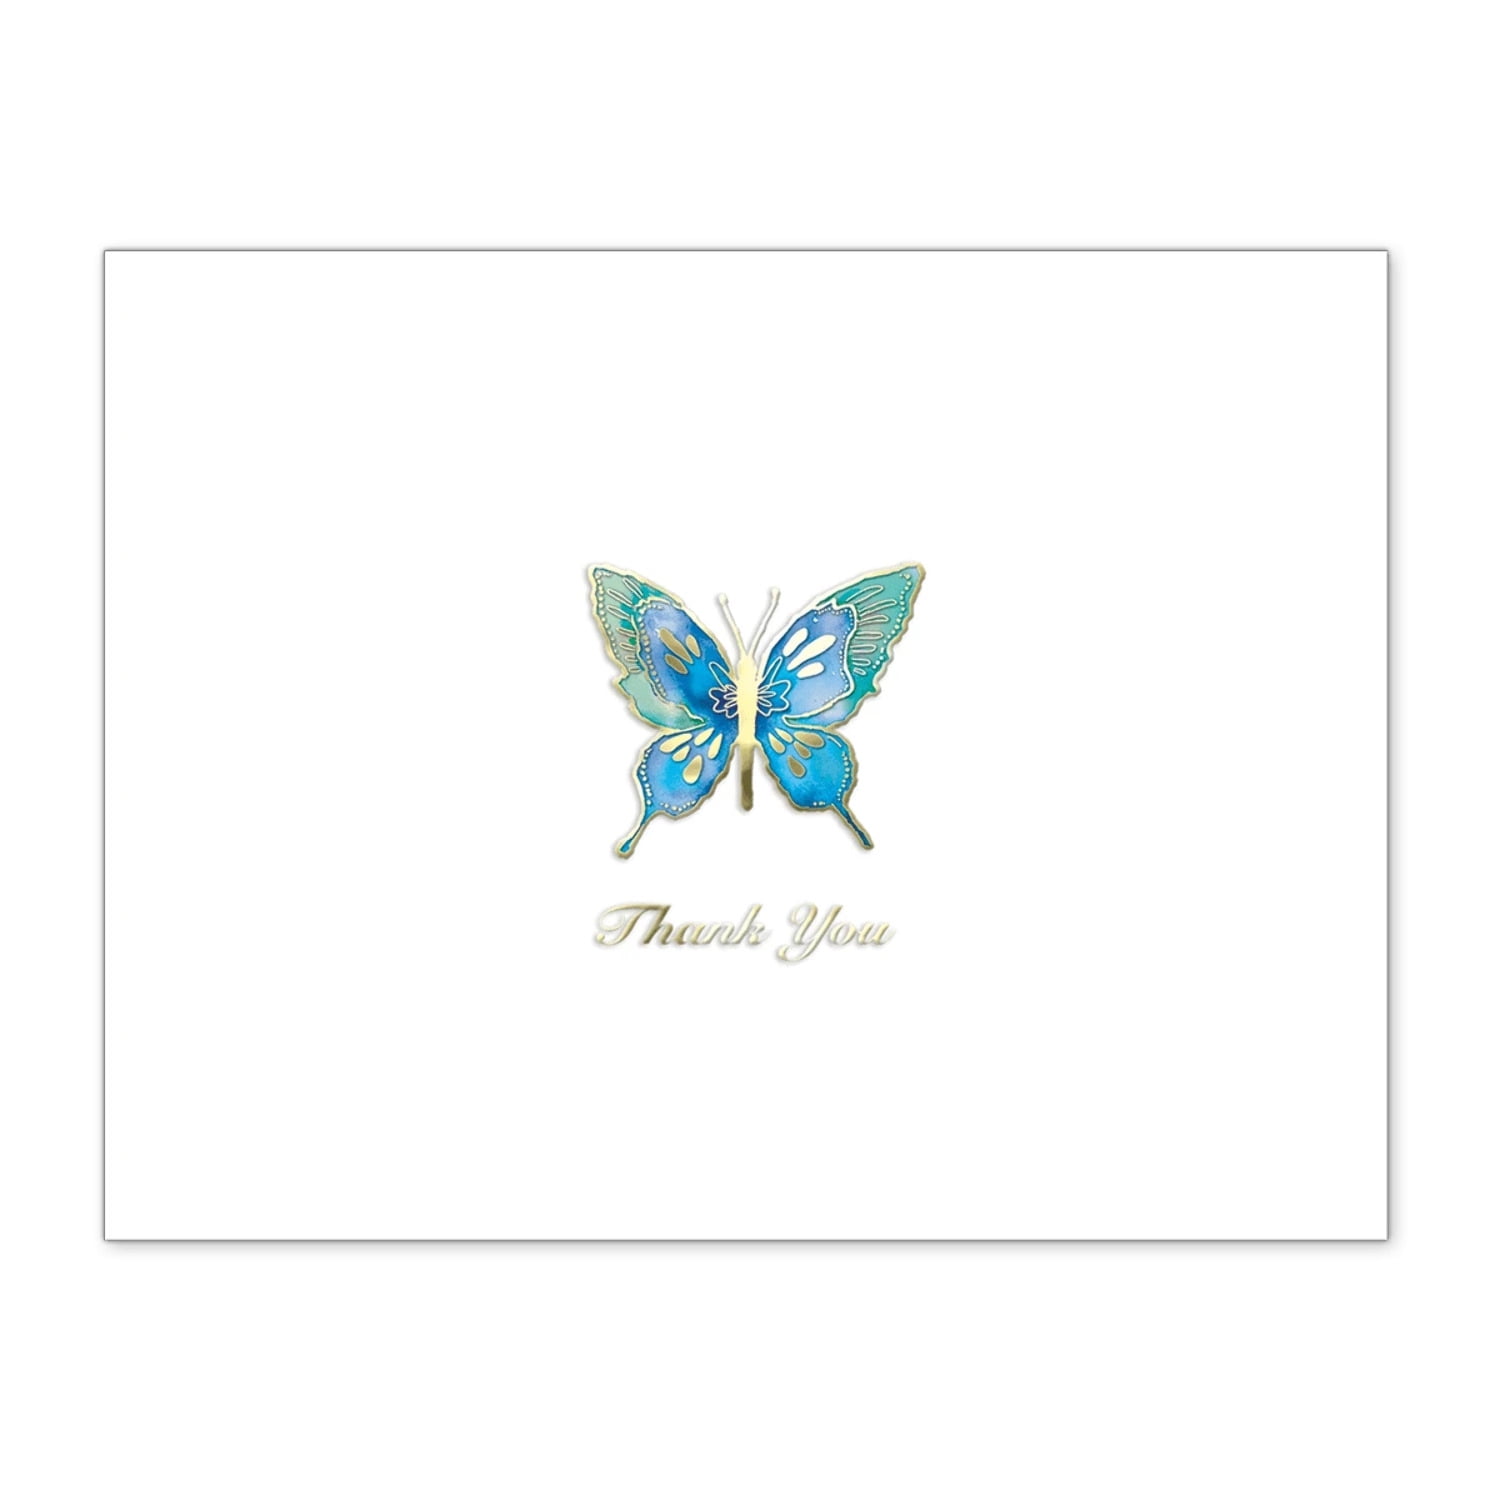 Flower And Butterfly Gems Thank You Greeting Card Bundle, 2-Count - Papyrus